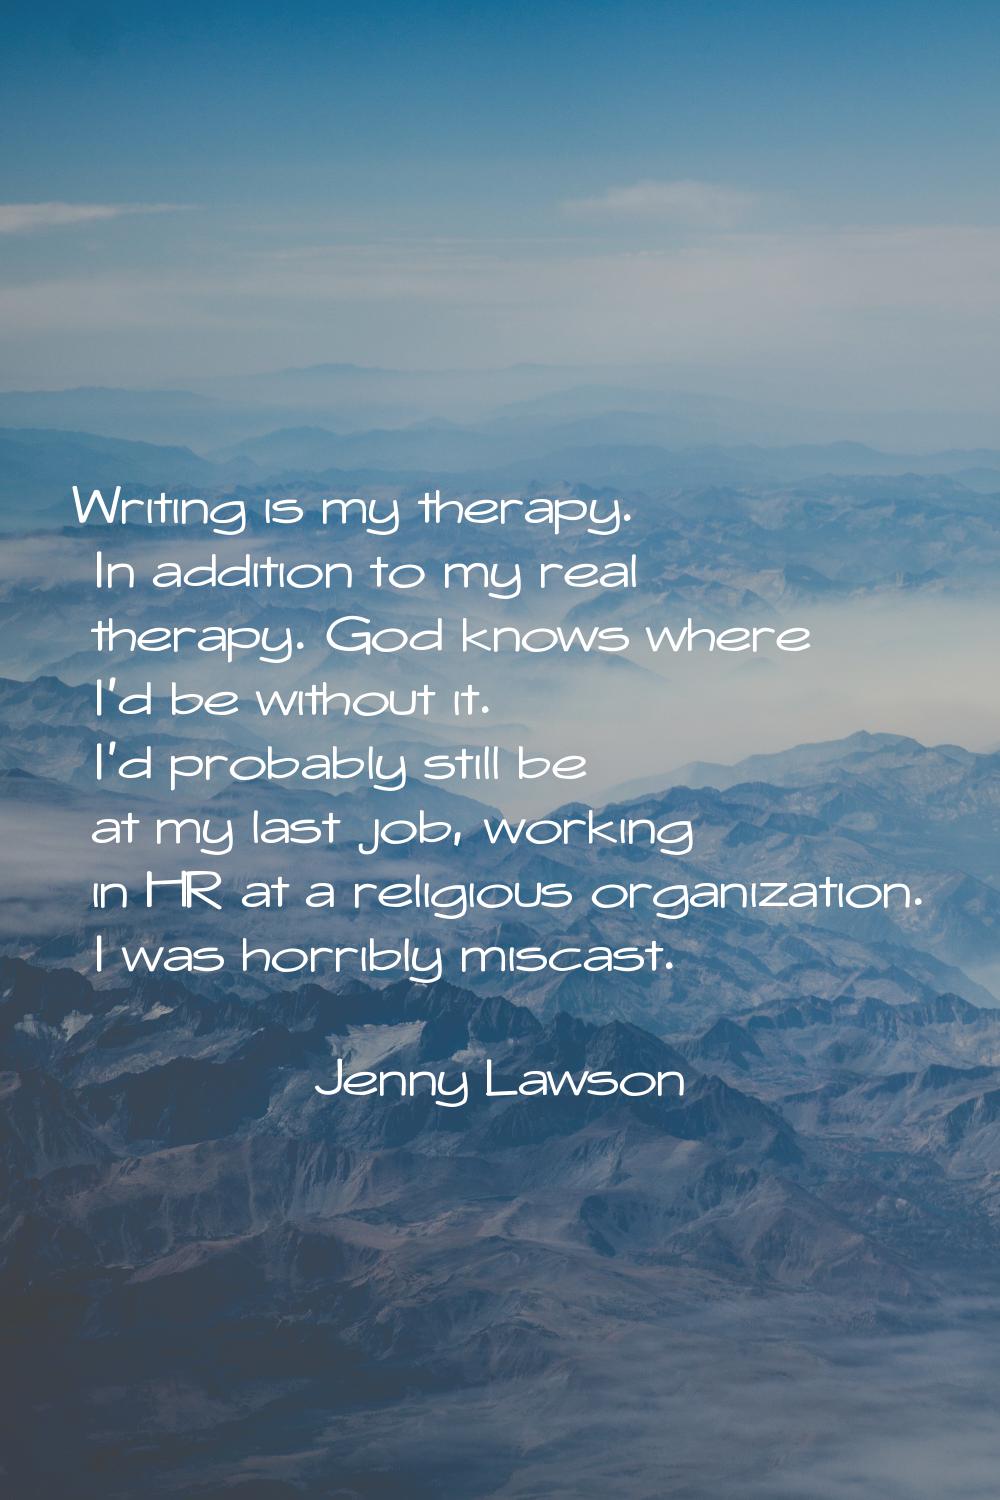 Writing is my therapy. In addition to my real therapy. God knows where I'd be without it. I'd proba